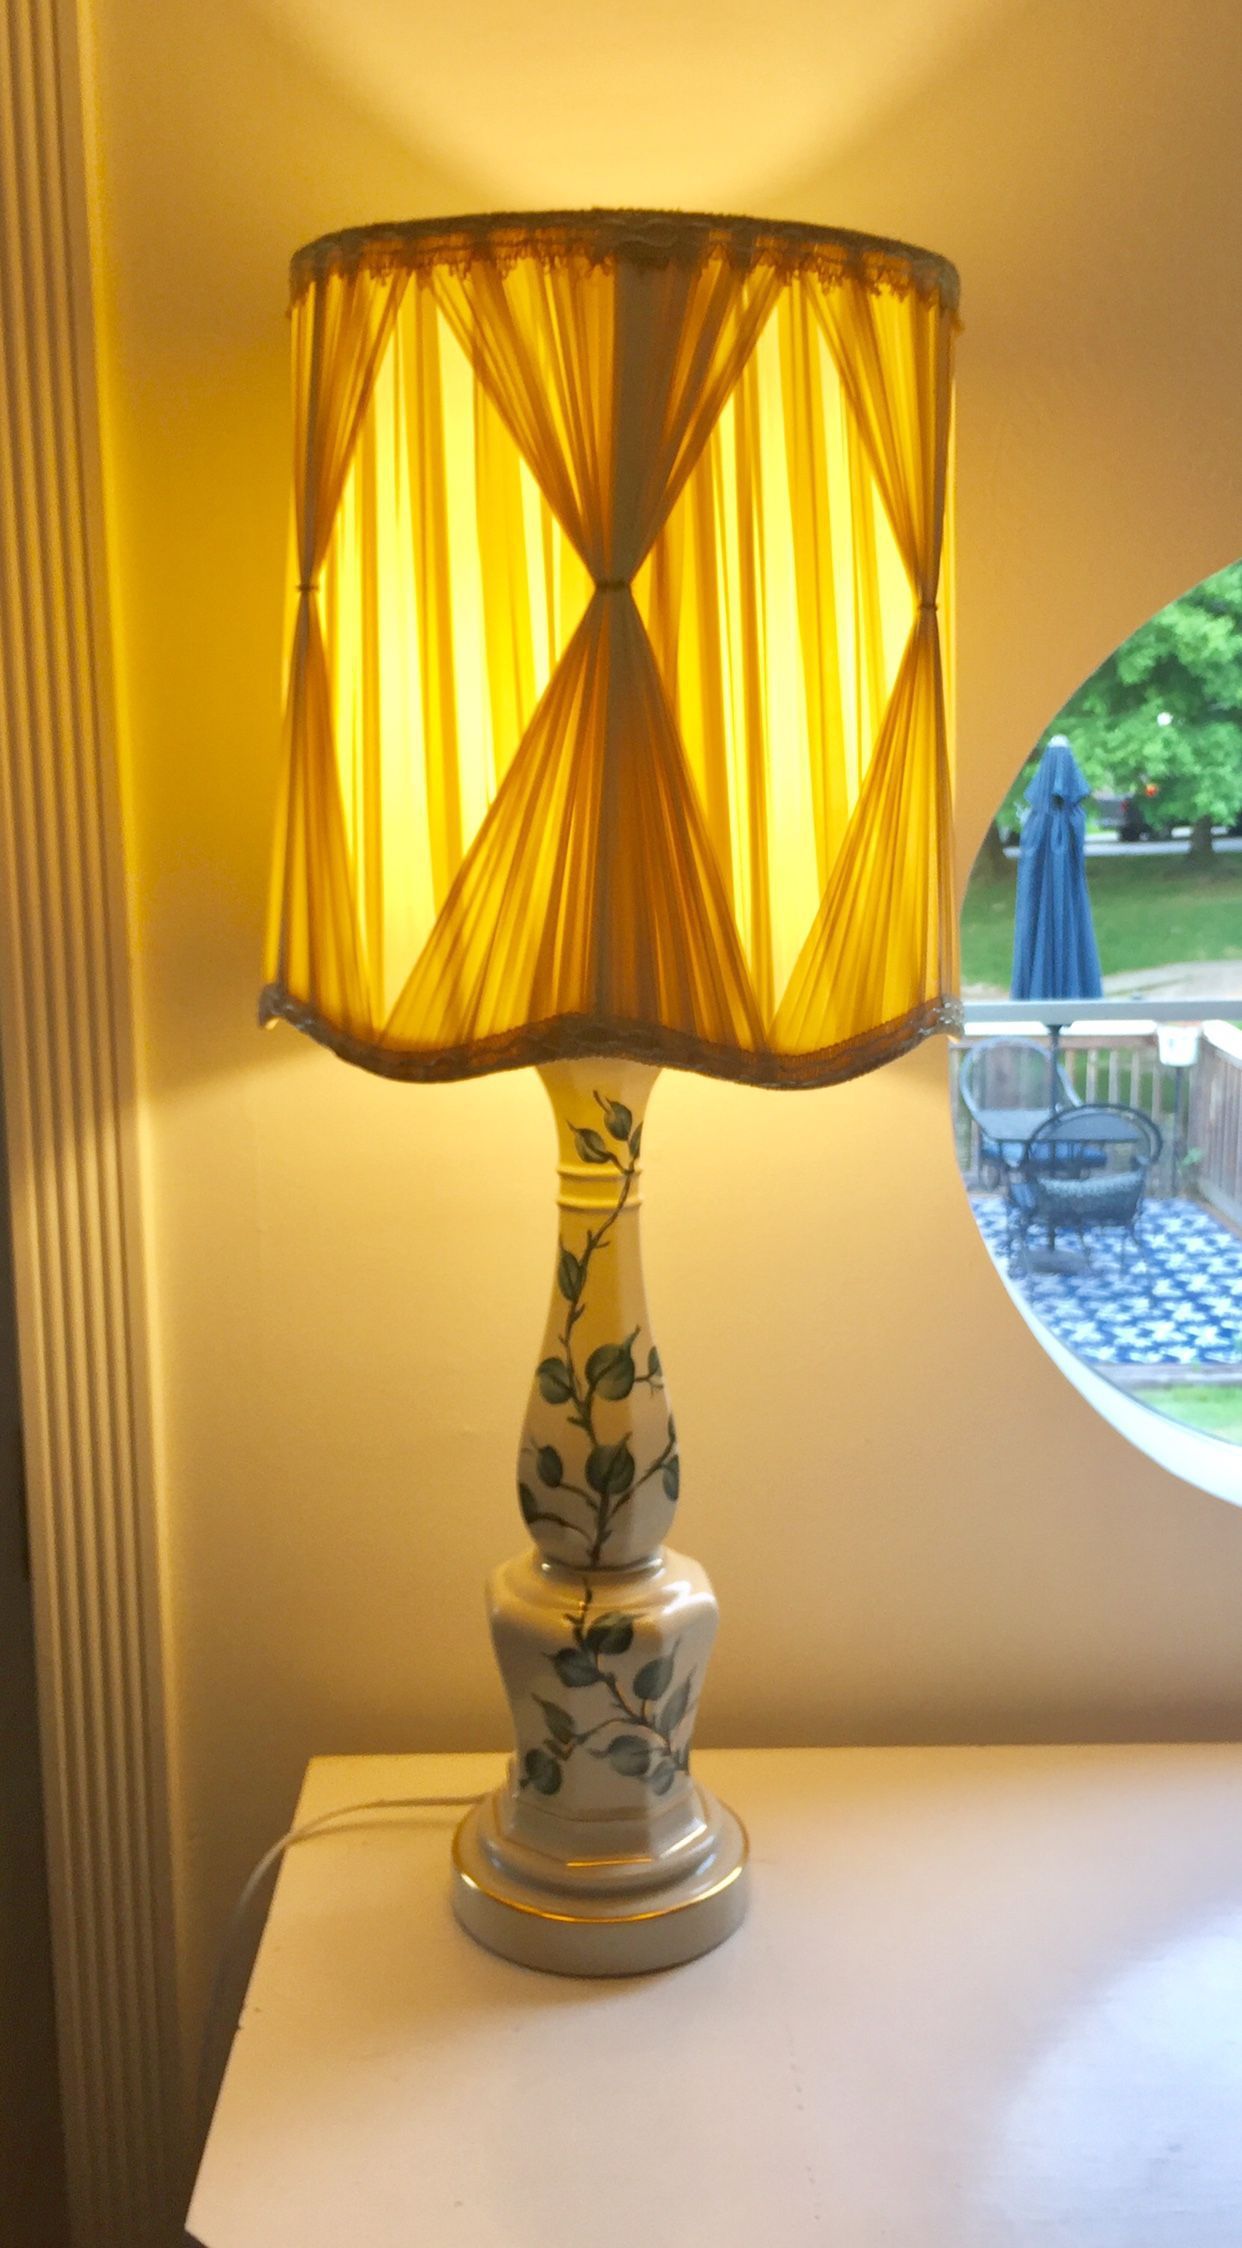 1960’s Off White w/ Trailing Green Ivy  Design & Hollywood Regency Shade 